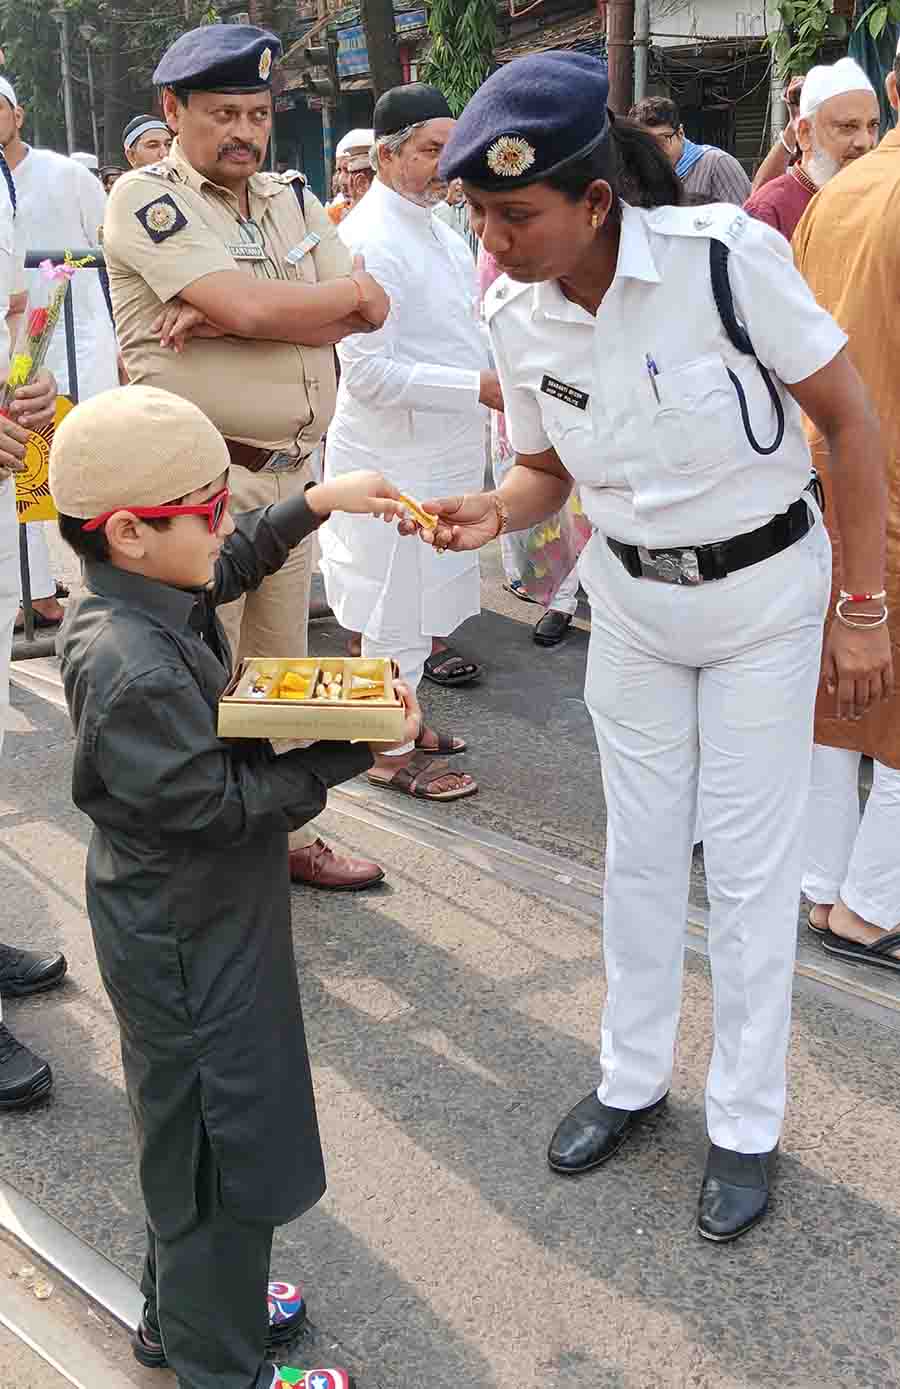 This young man was spotted distributing sweets to a policewoman at Esplanade after the prayers